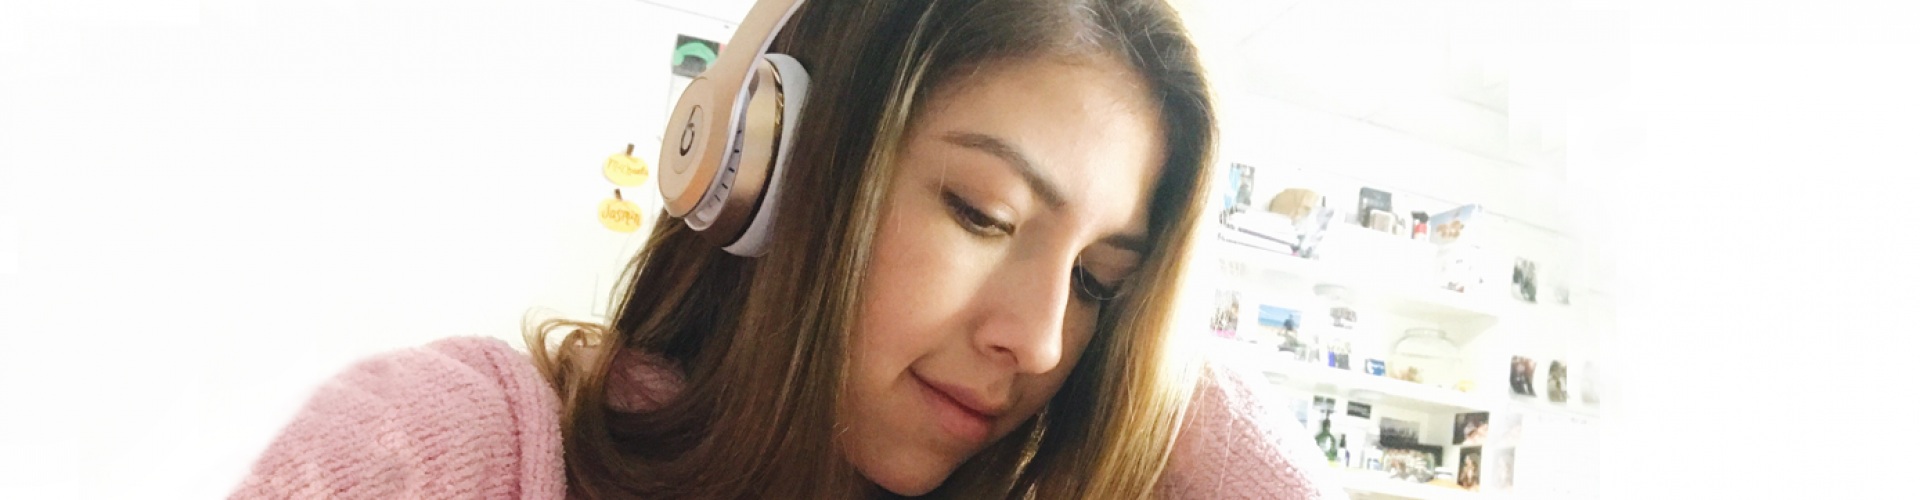 A girl with headphones on, looking down.